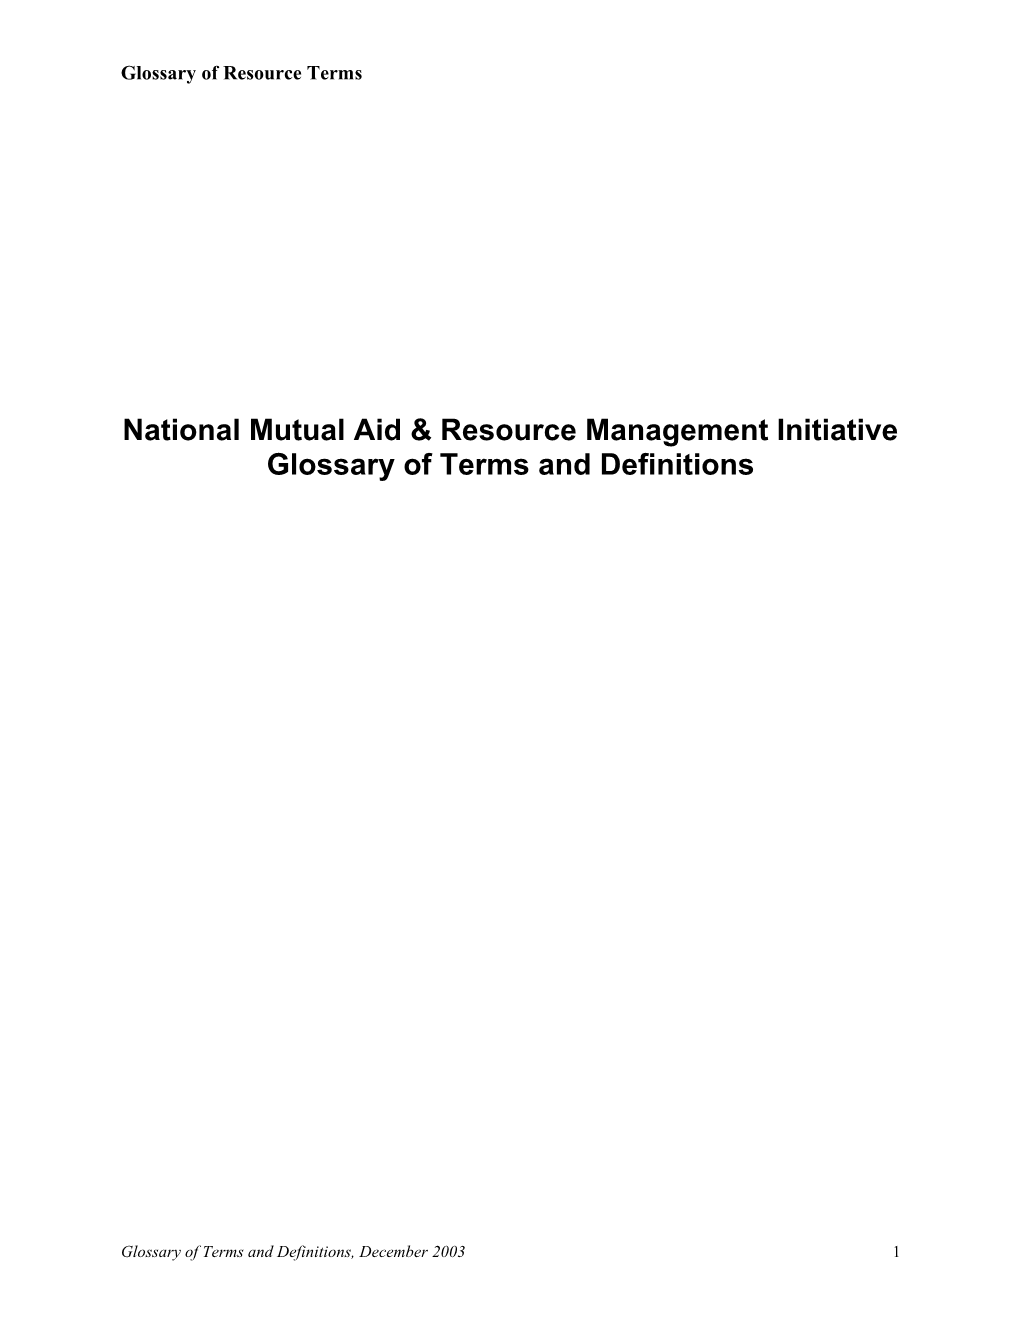 National Mutual Aid and Resource Management Initiative